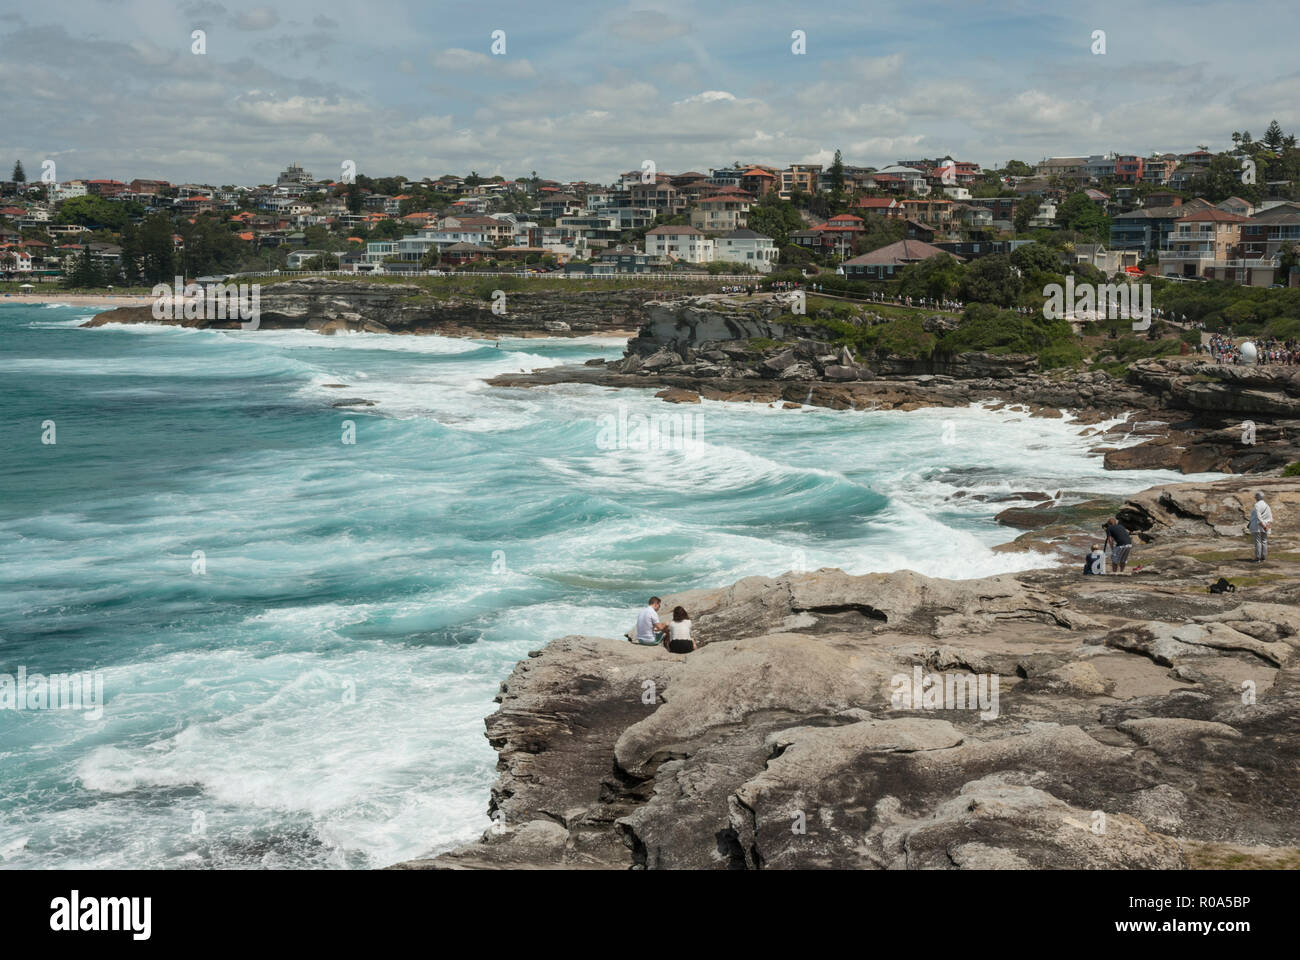 Looking along the coast from the Bondi coastal walk and path with Tamarama and Bronte bays and beaches. Sunny day with high sea surf. Sydney Australia Stock Photo